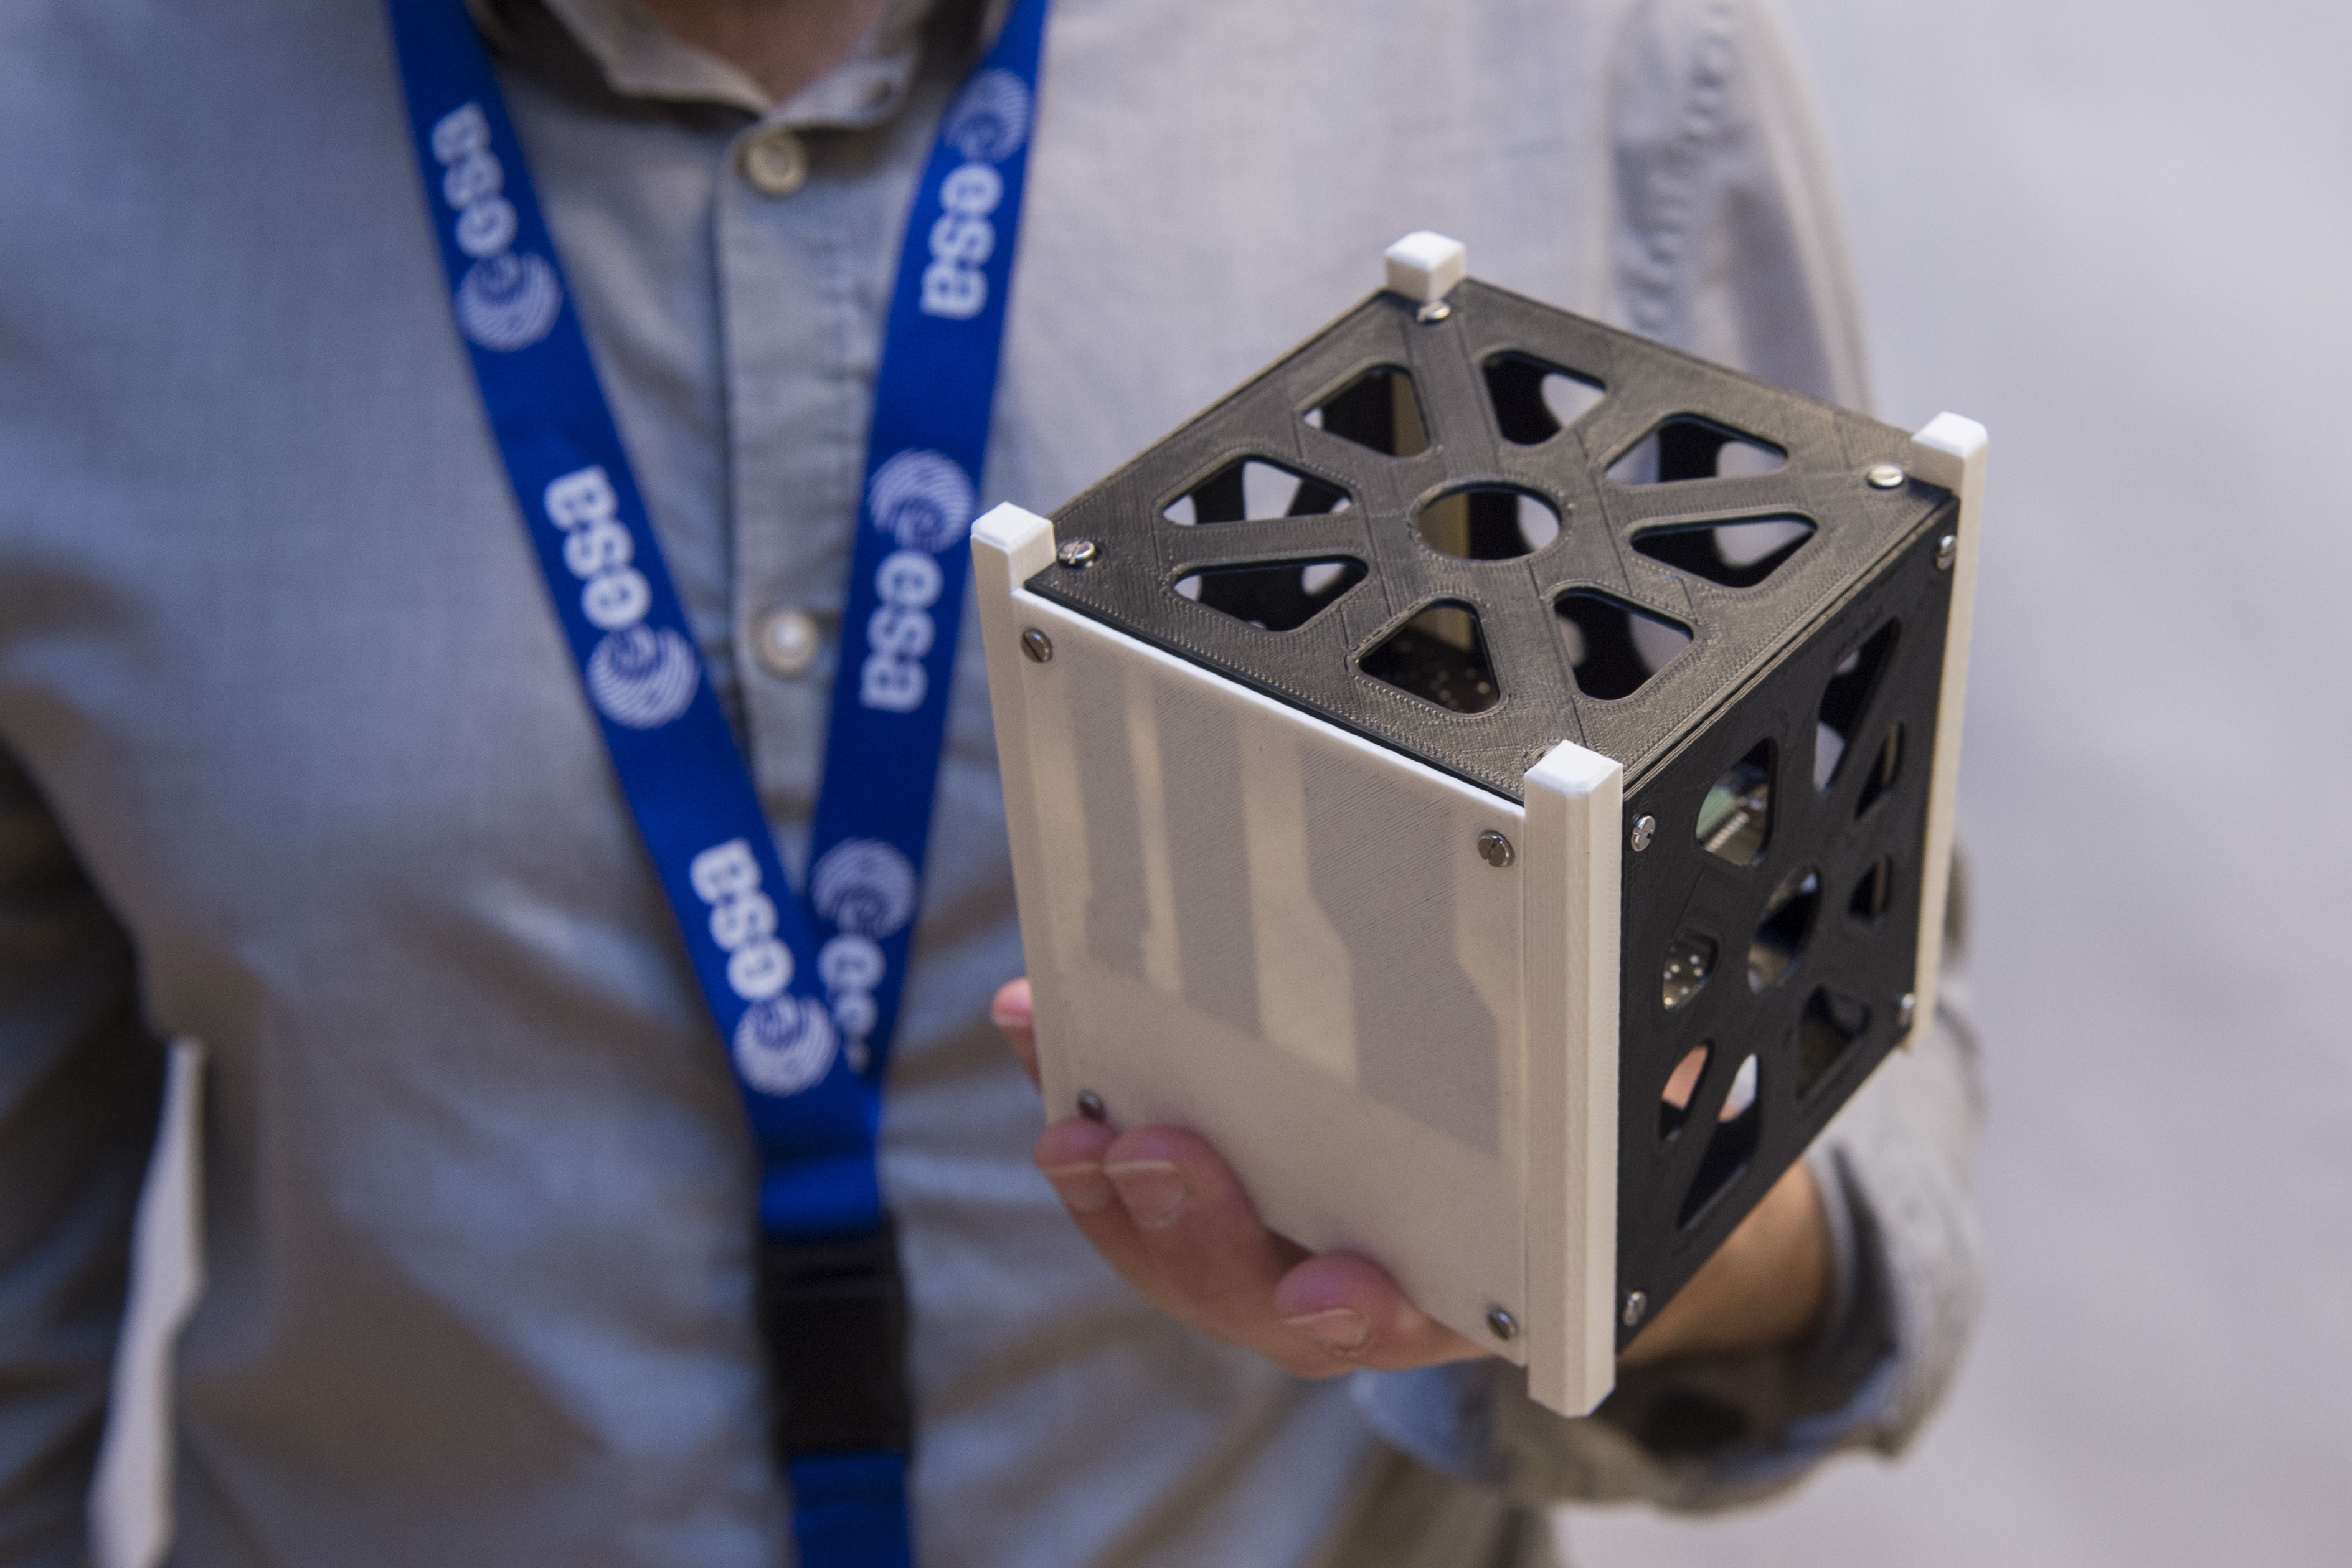 Small, lightweight cubesats are being used for low cost orbital missions around Earth and Mars. https:/commons.wikimedia.org/wiki/File:Electrical_lines_in_CubeSat_body_ESA377711.jpg; 